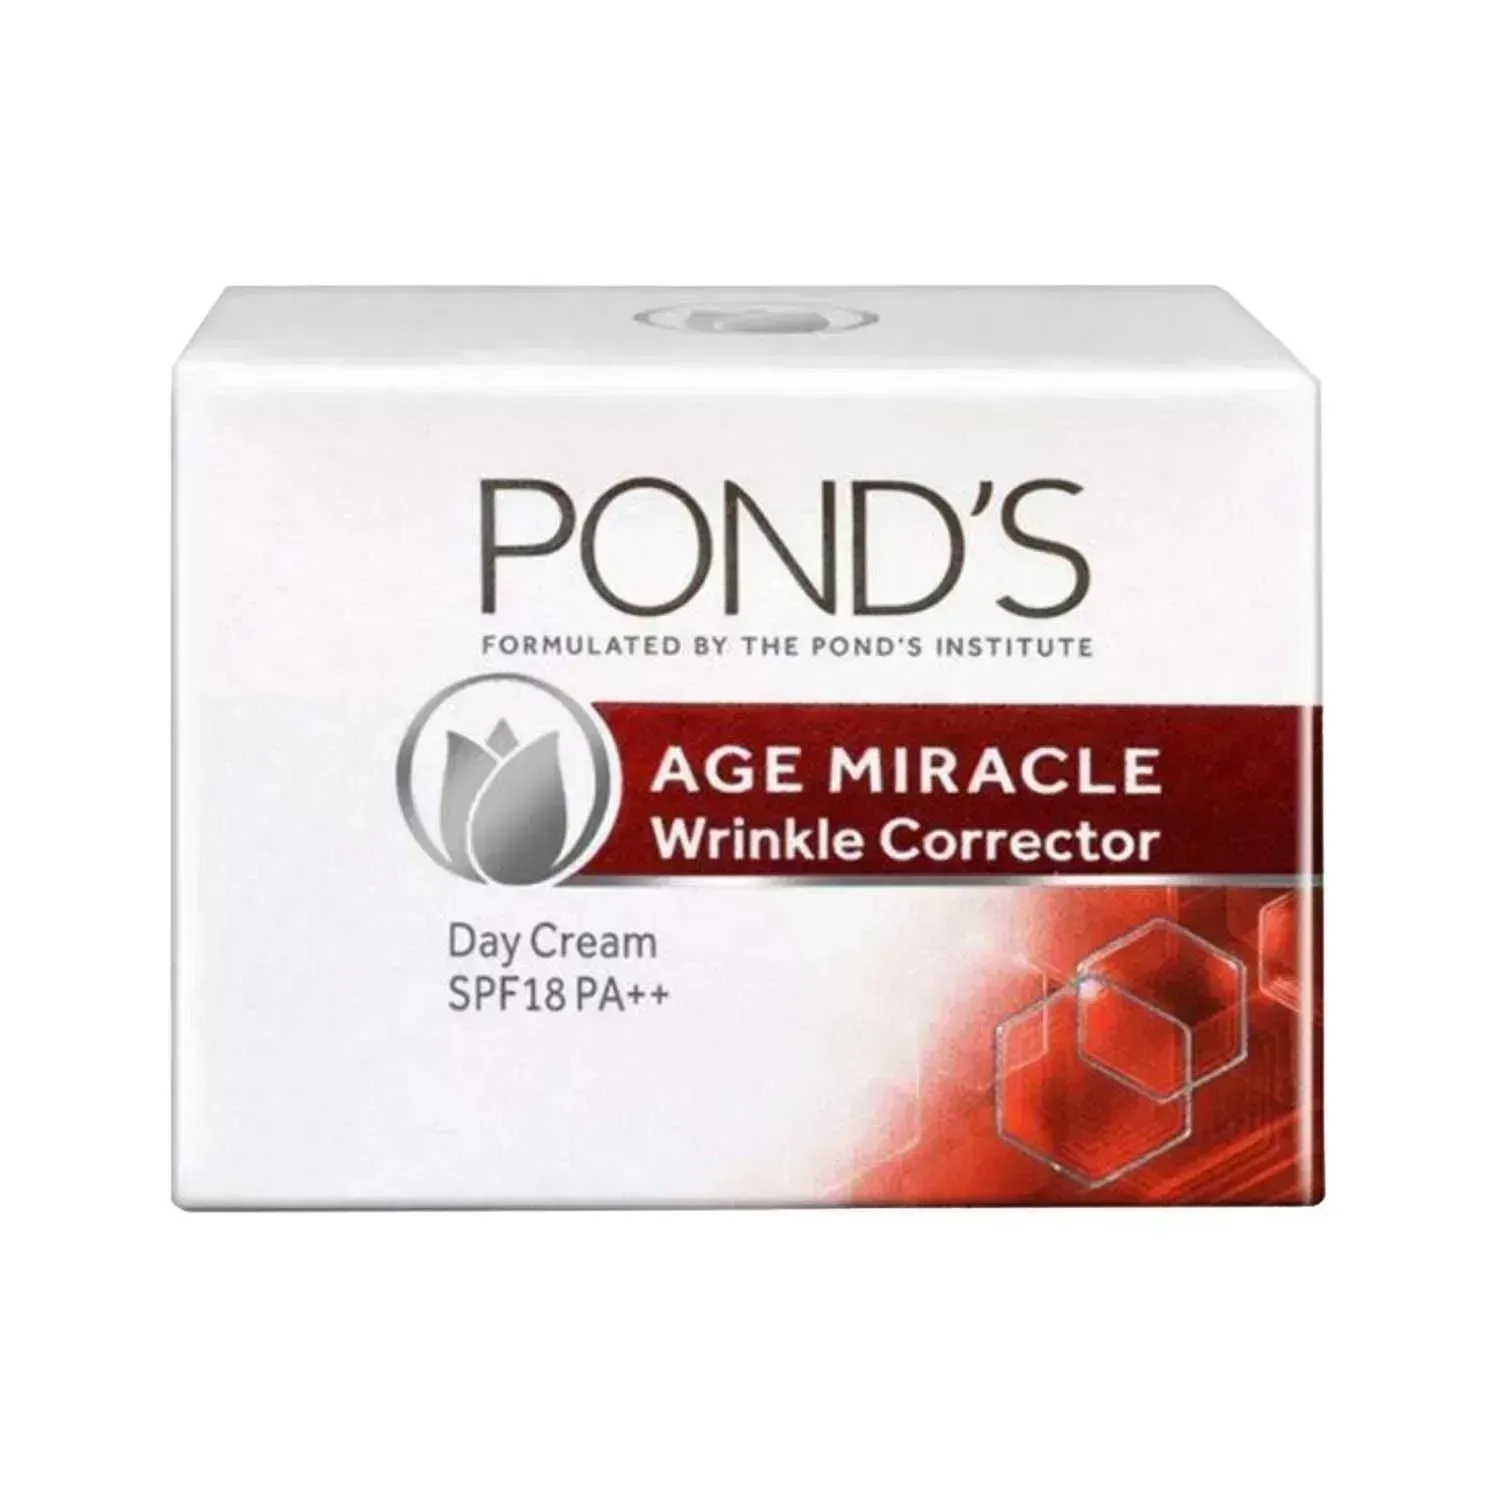 Pond's Age Miracle Wrinkle Corrector Day Cream SPF 18 Pa++ - (10g)